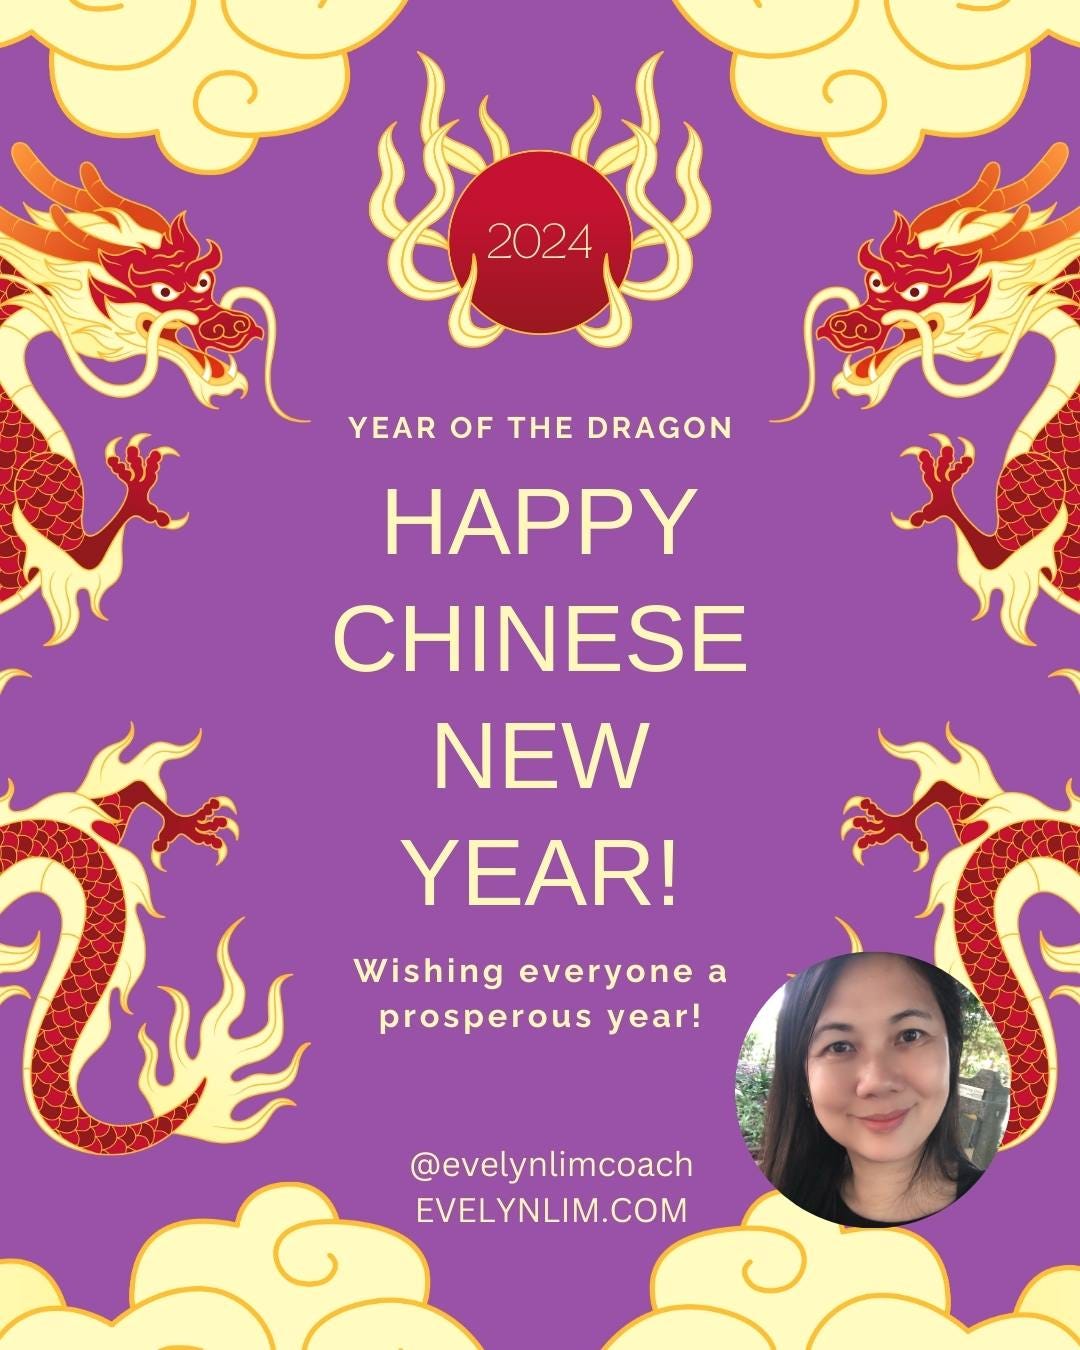 Welcome the Year of the Wood Dragon 2024